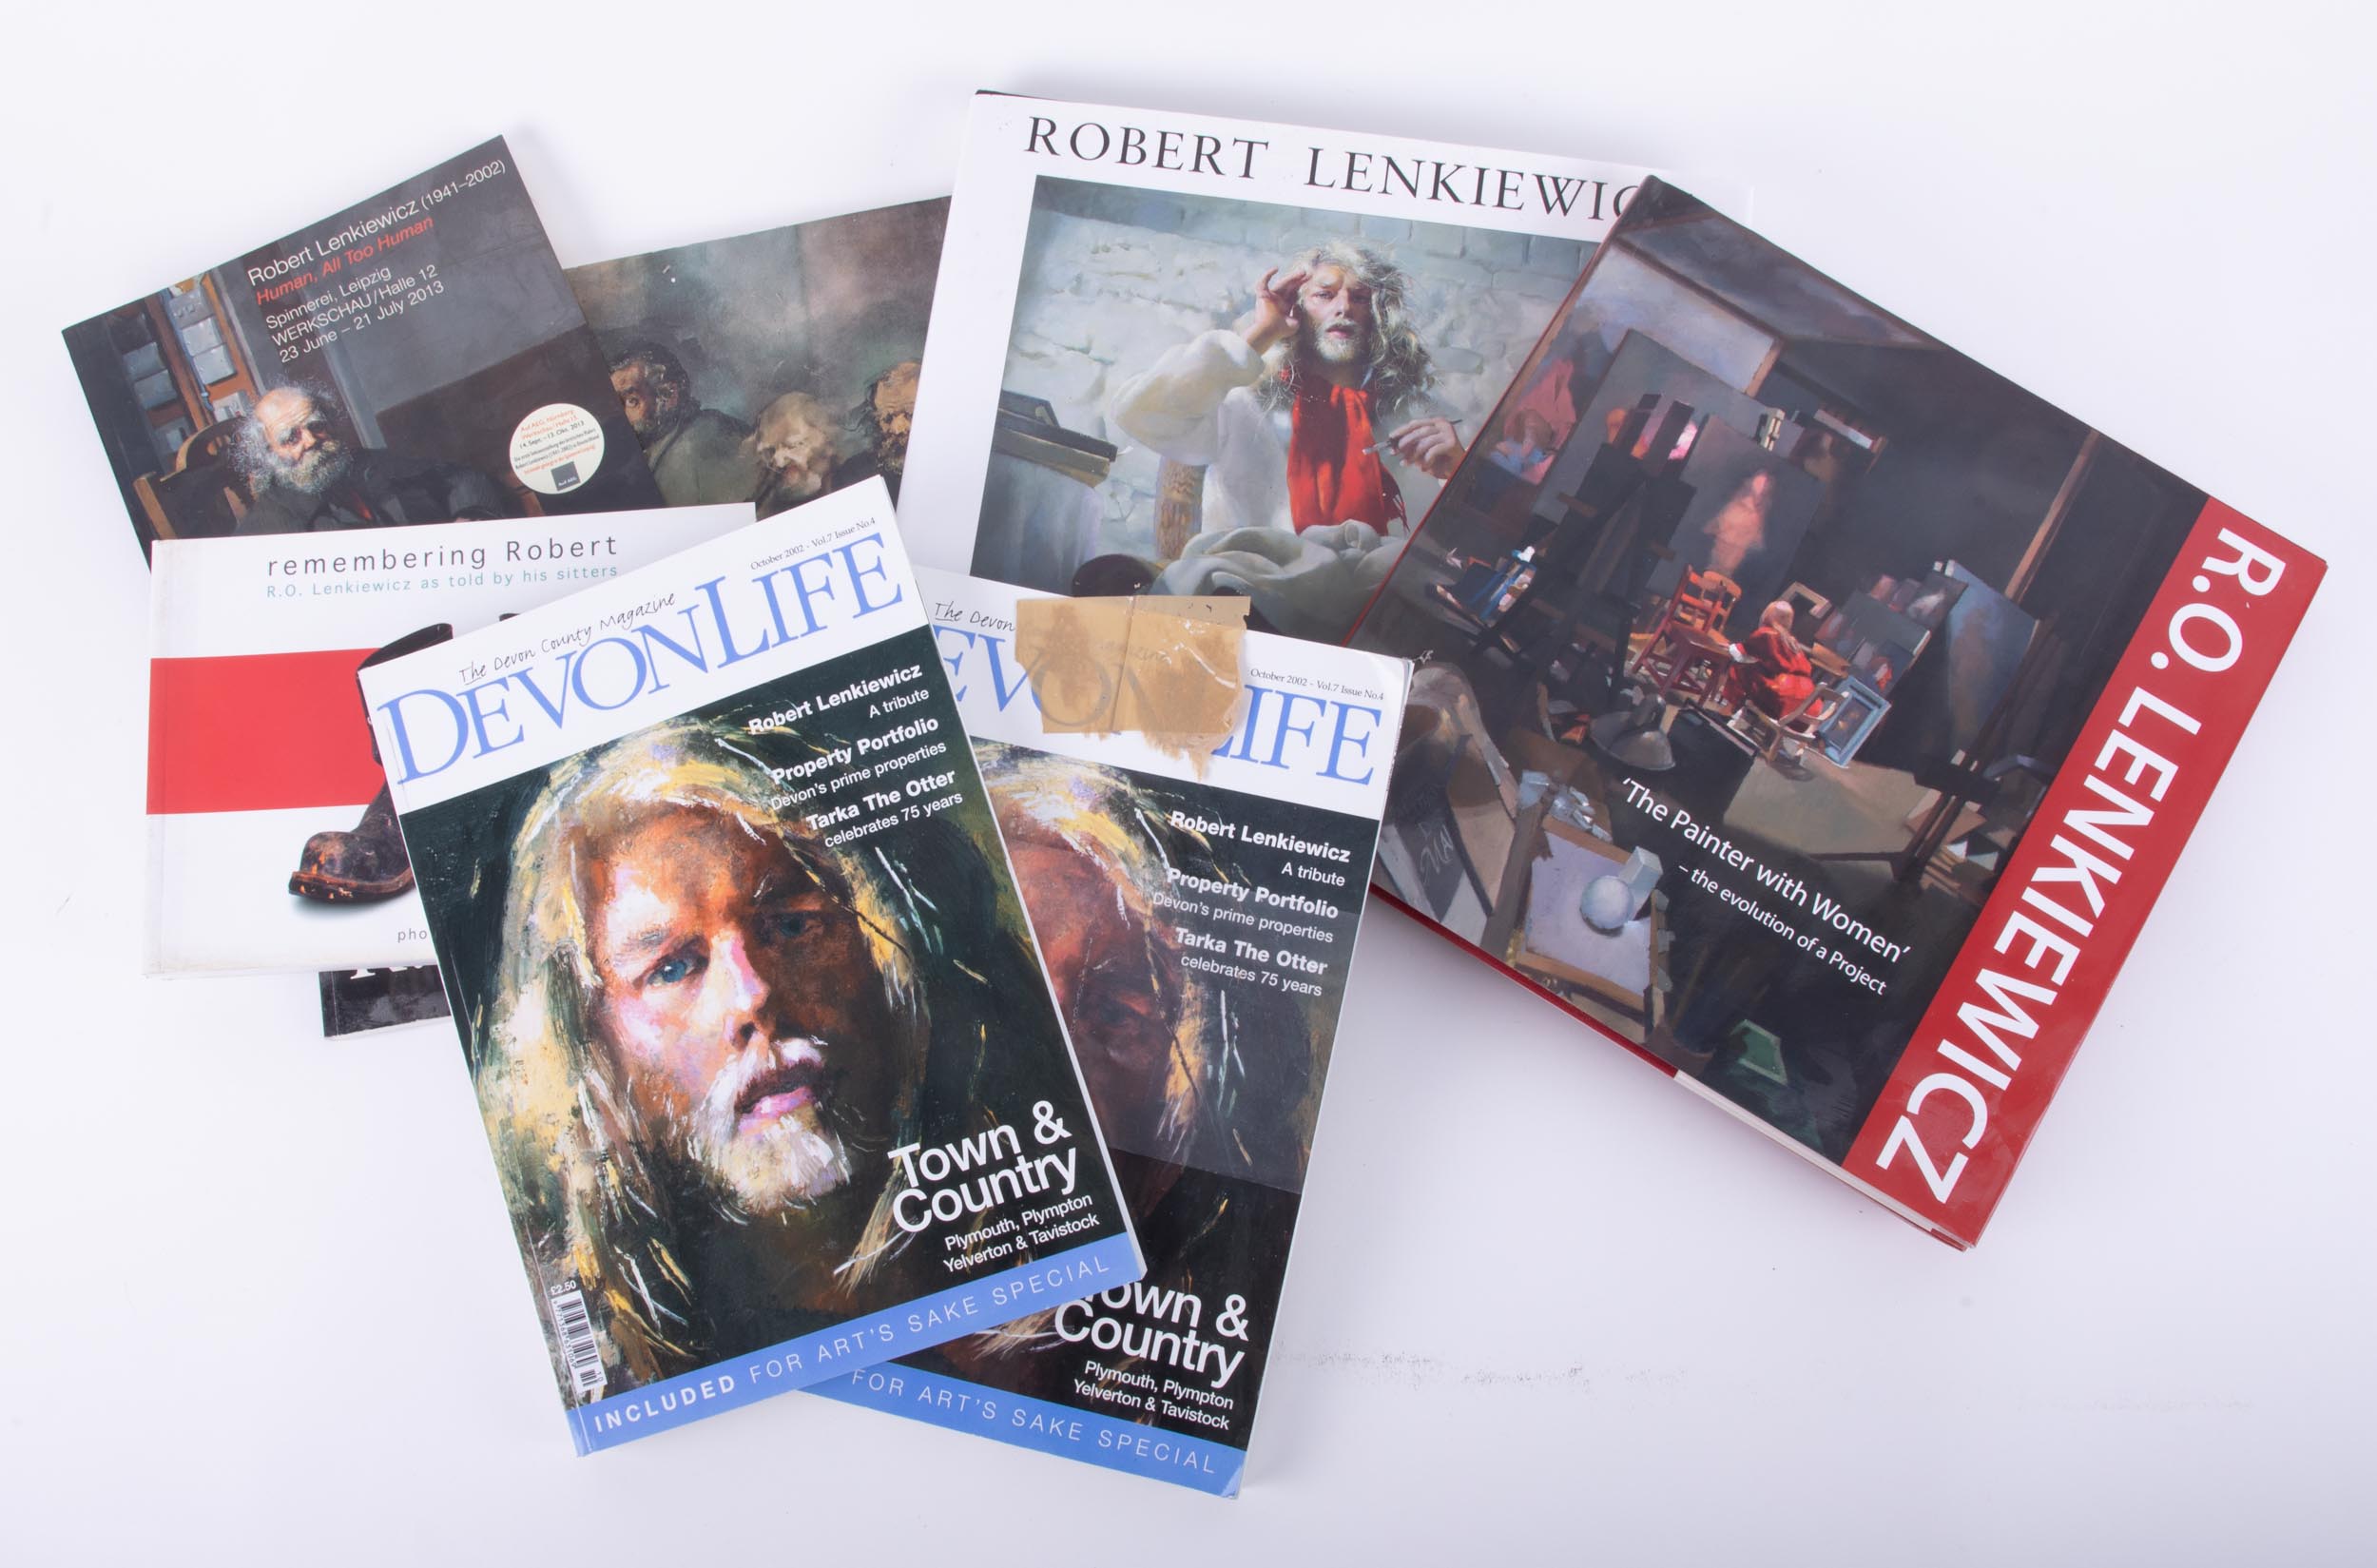 Robert Lenkiewicz collection to include books, The Painter with Women, Paintings & Projects and